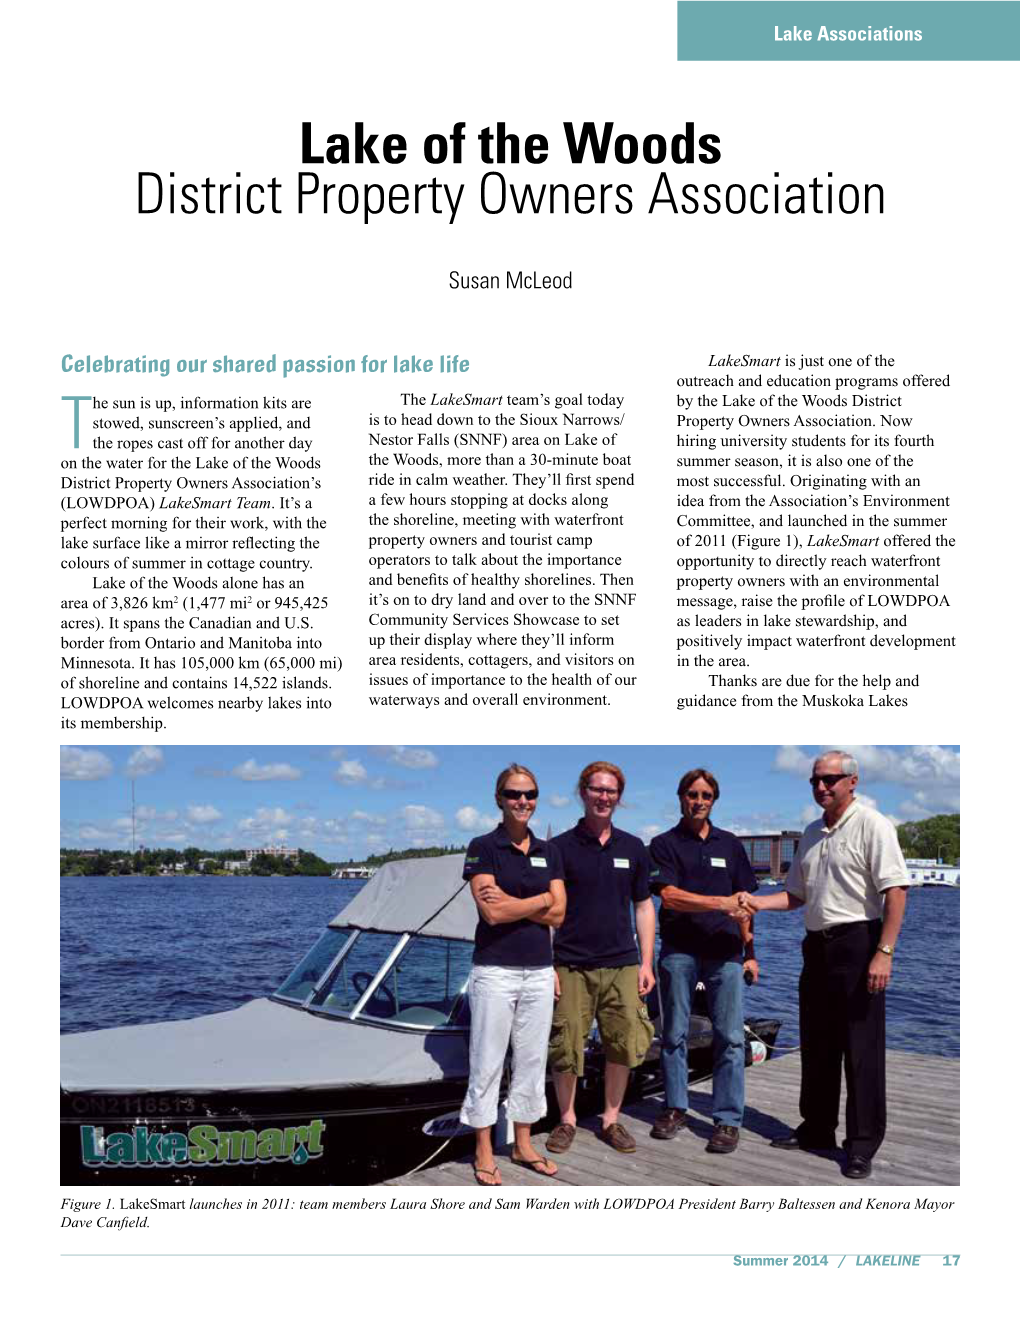 Lake of the Woods District Property Owners Association